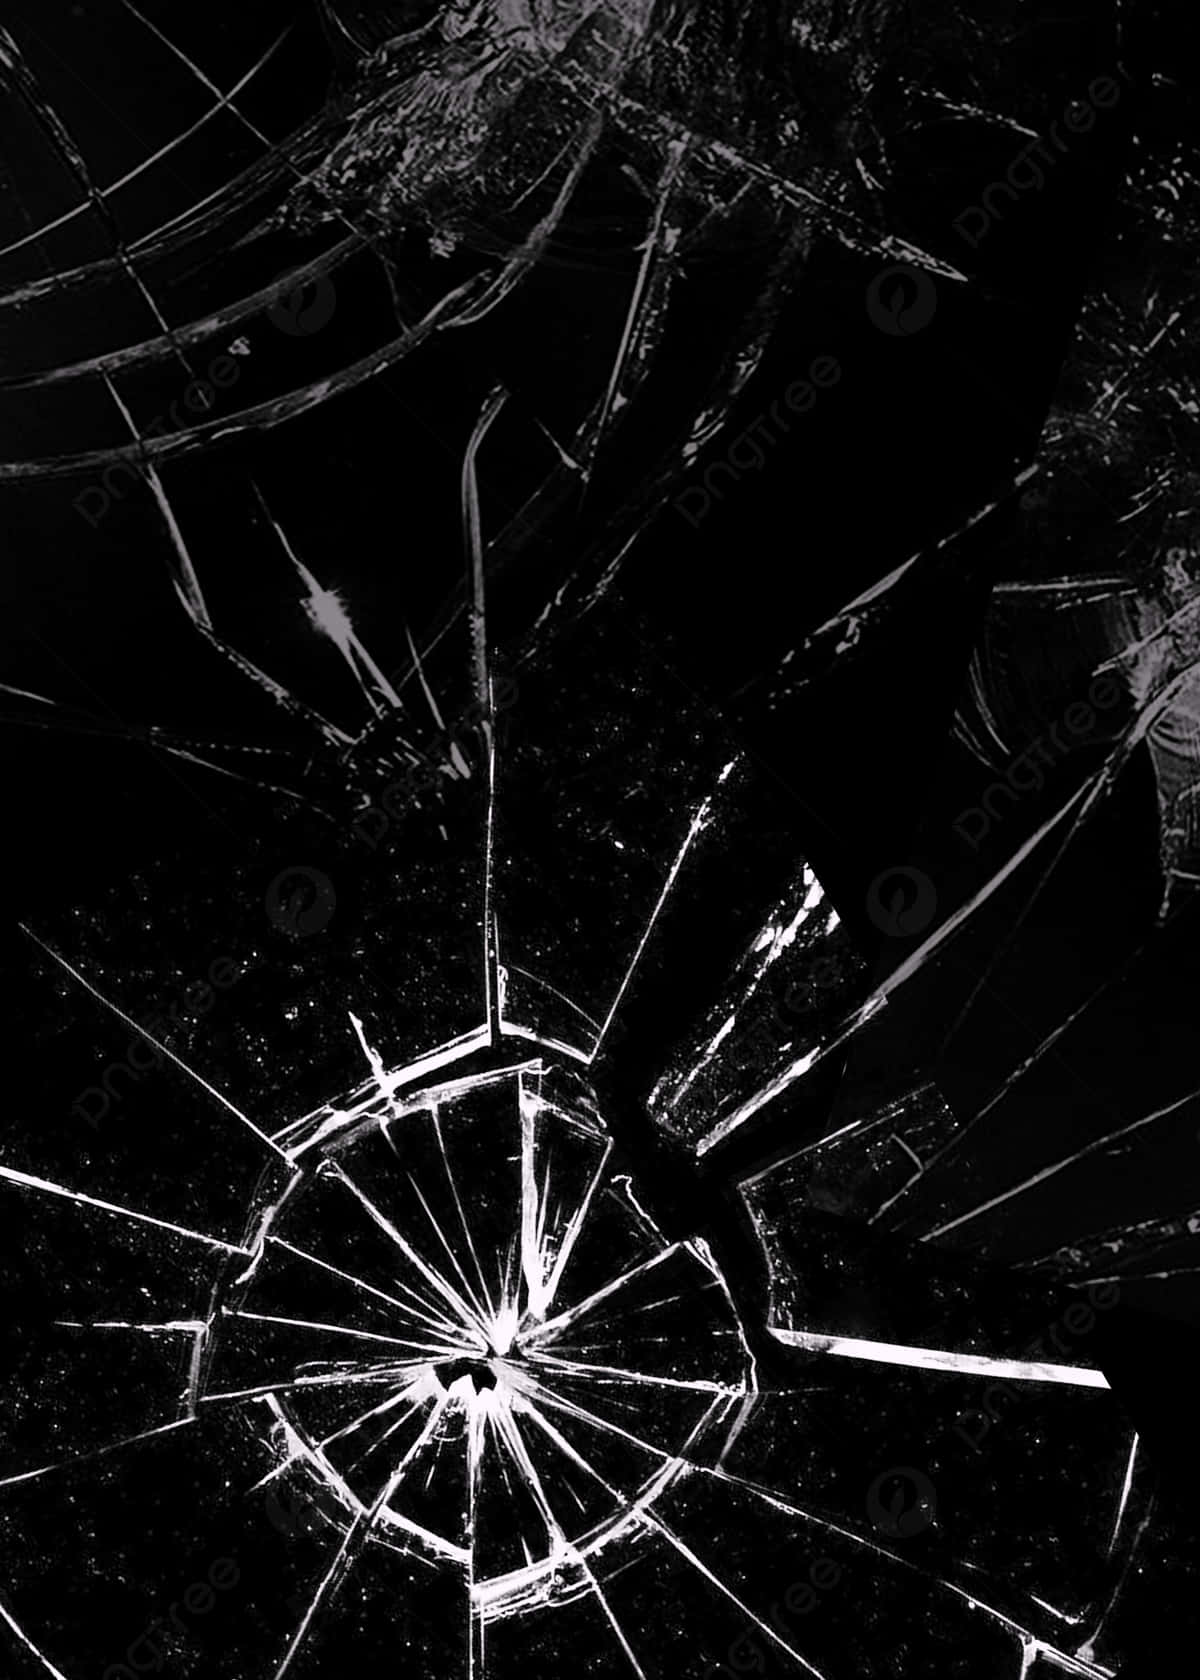 Shattered Glass Texture on a Black Background